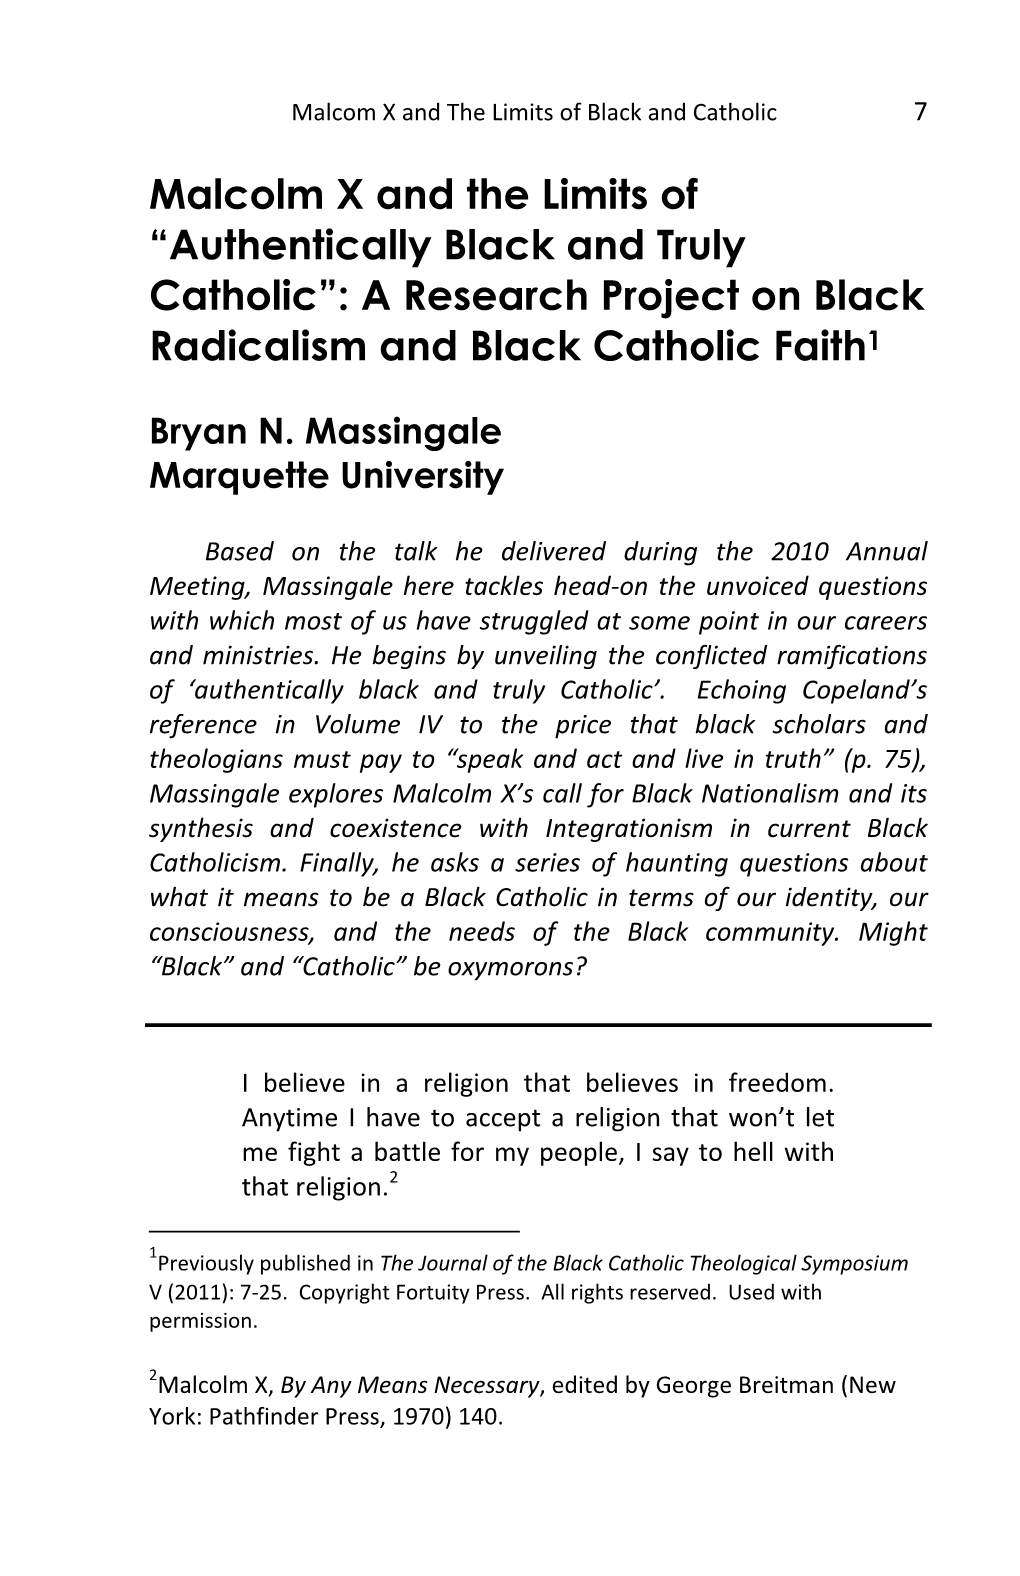 Malcolm X and the Limits of “Authentically Black and Truly Catholic”: a Research Project on Black Radicalism and Black Catholic Faith1